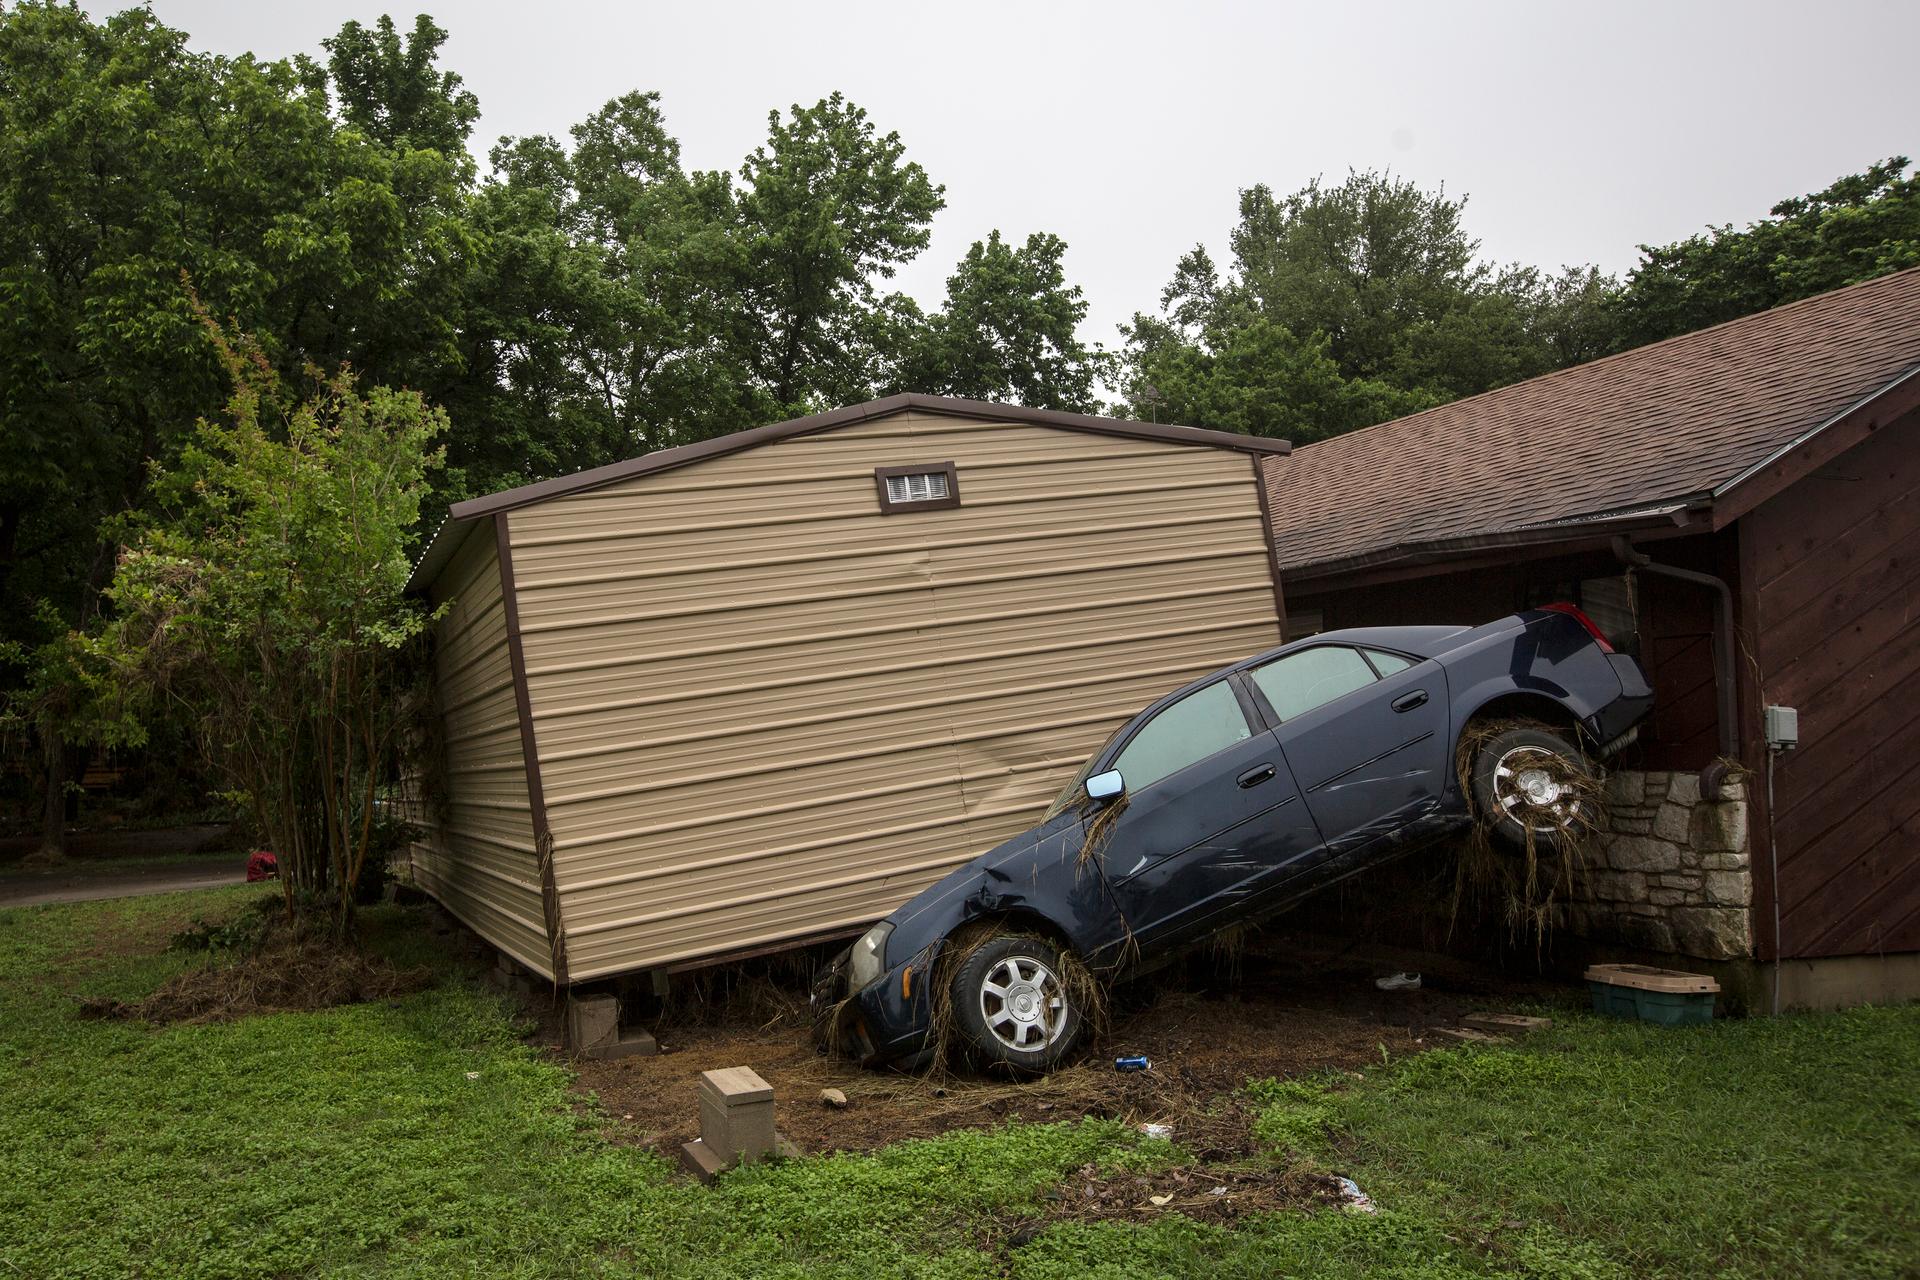 Flood damaged vehicles and debris are strewn across lawns in San Marcos, Texas May 26, 2015.